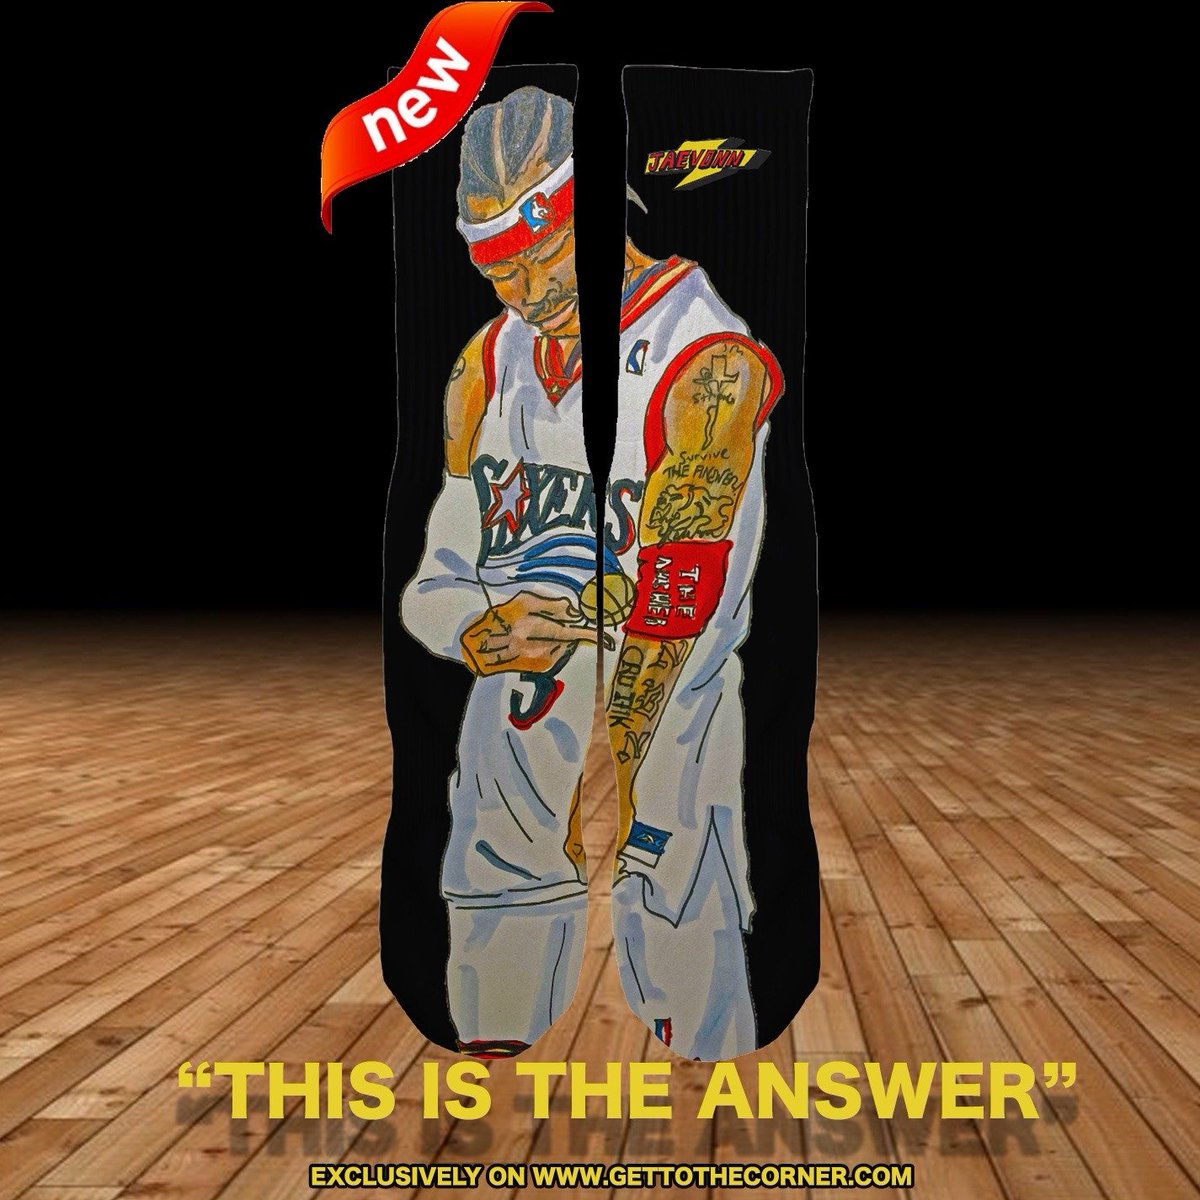 Cop only at gettothecorner.com/welcome/thisis…
#AllenIverson
#TheAnswer
#AI3
#Iverson
#SixersLegend
#BasketballHallOfFame
#NBAIcon
#CrossoverKing
#Philadelphia76ers
#ReebokQuestion